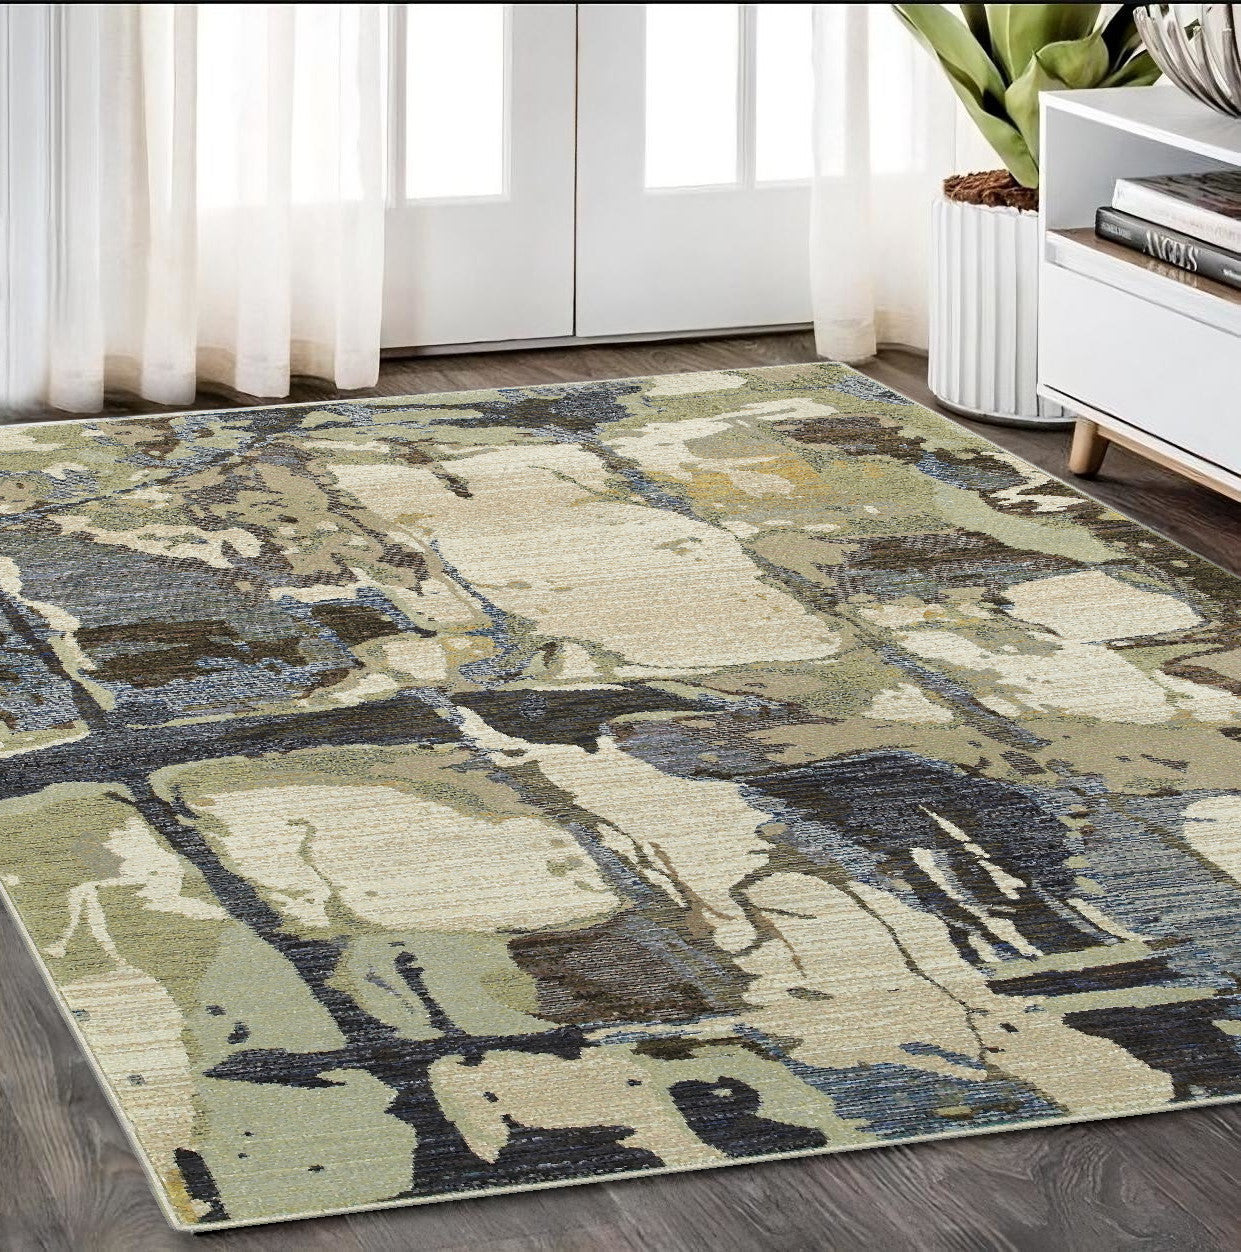 5' x 7' Blue and Gray Abstract Power Loom Area Rug